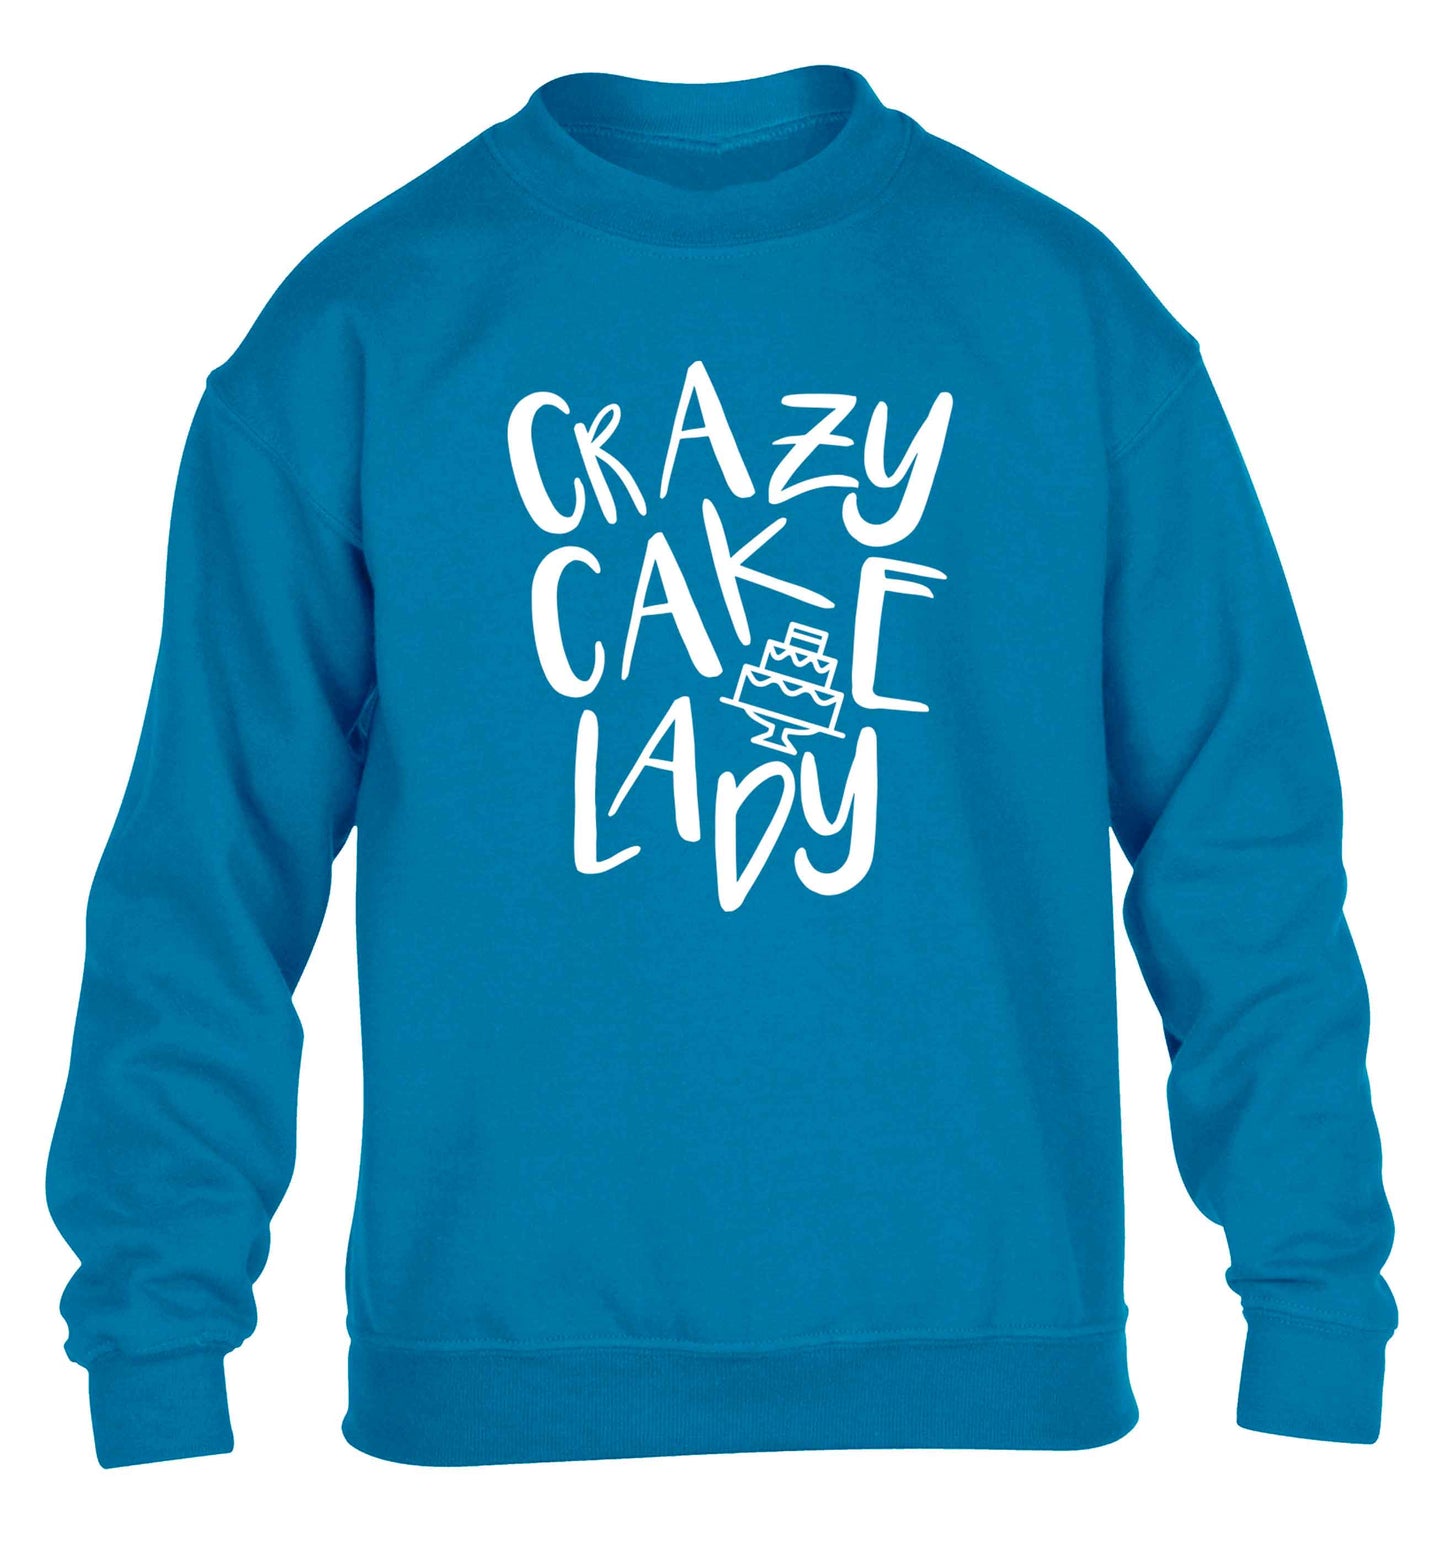 Crazy cake lady children's blue sweater 12-13 Years